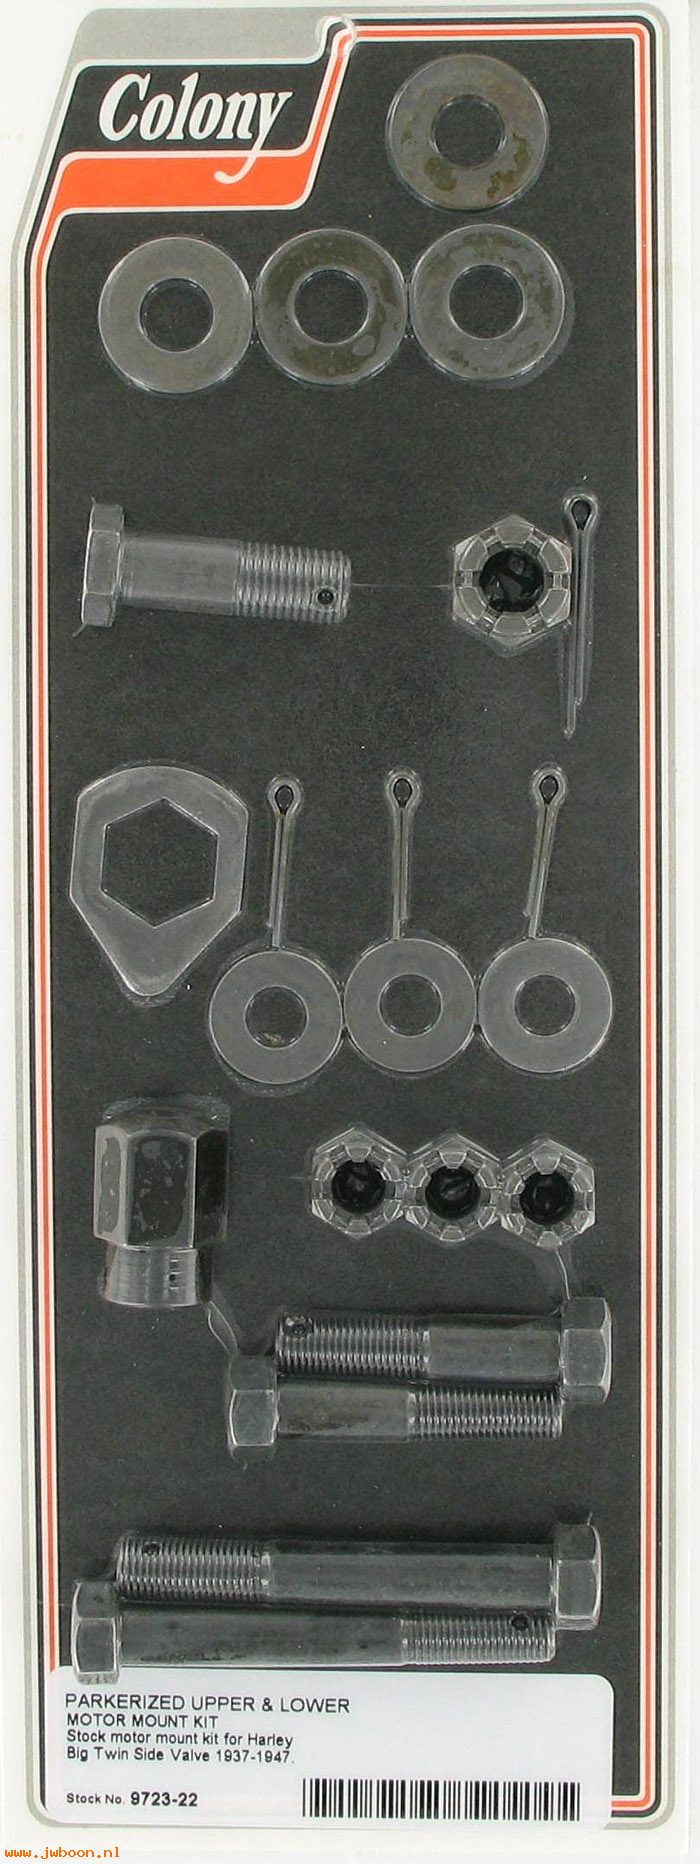 C 9723-22 (24791-36 / 4379): Upper and lower motor mount kit - CP heads - UL '37-'47, in stock